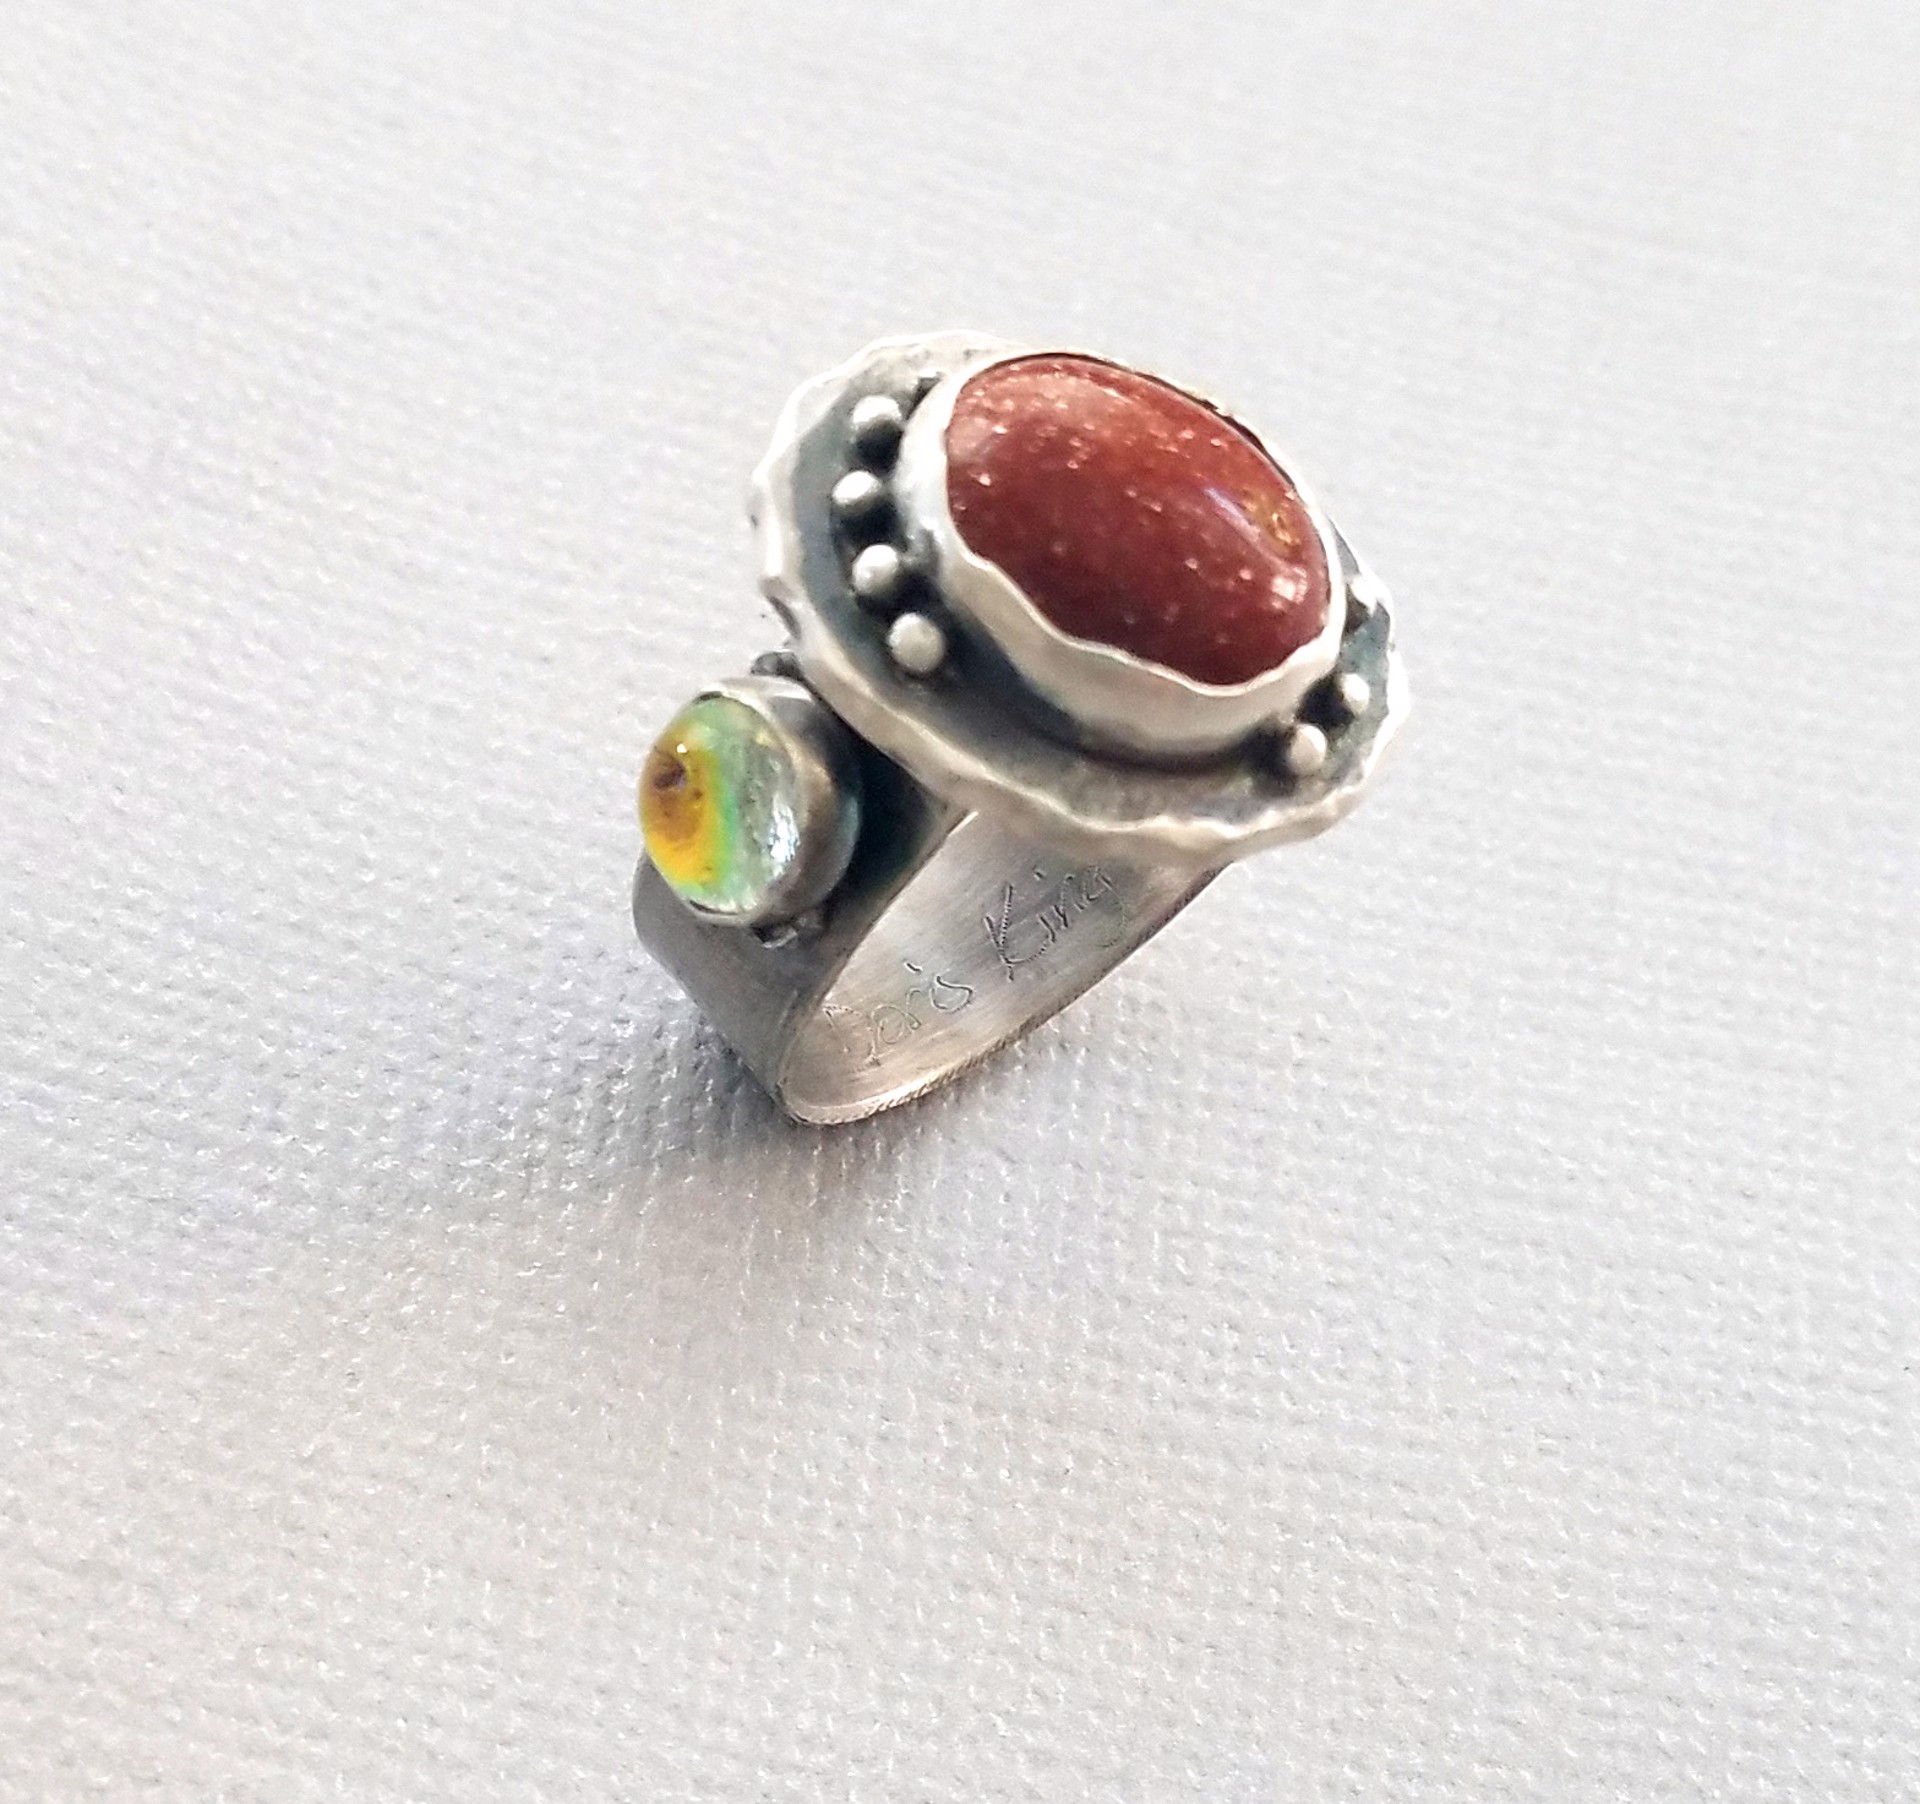 Ring - Sunstone Ring with Dichoric Glass 2906 by Doris King